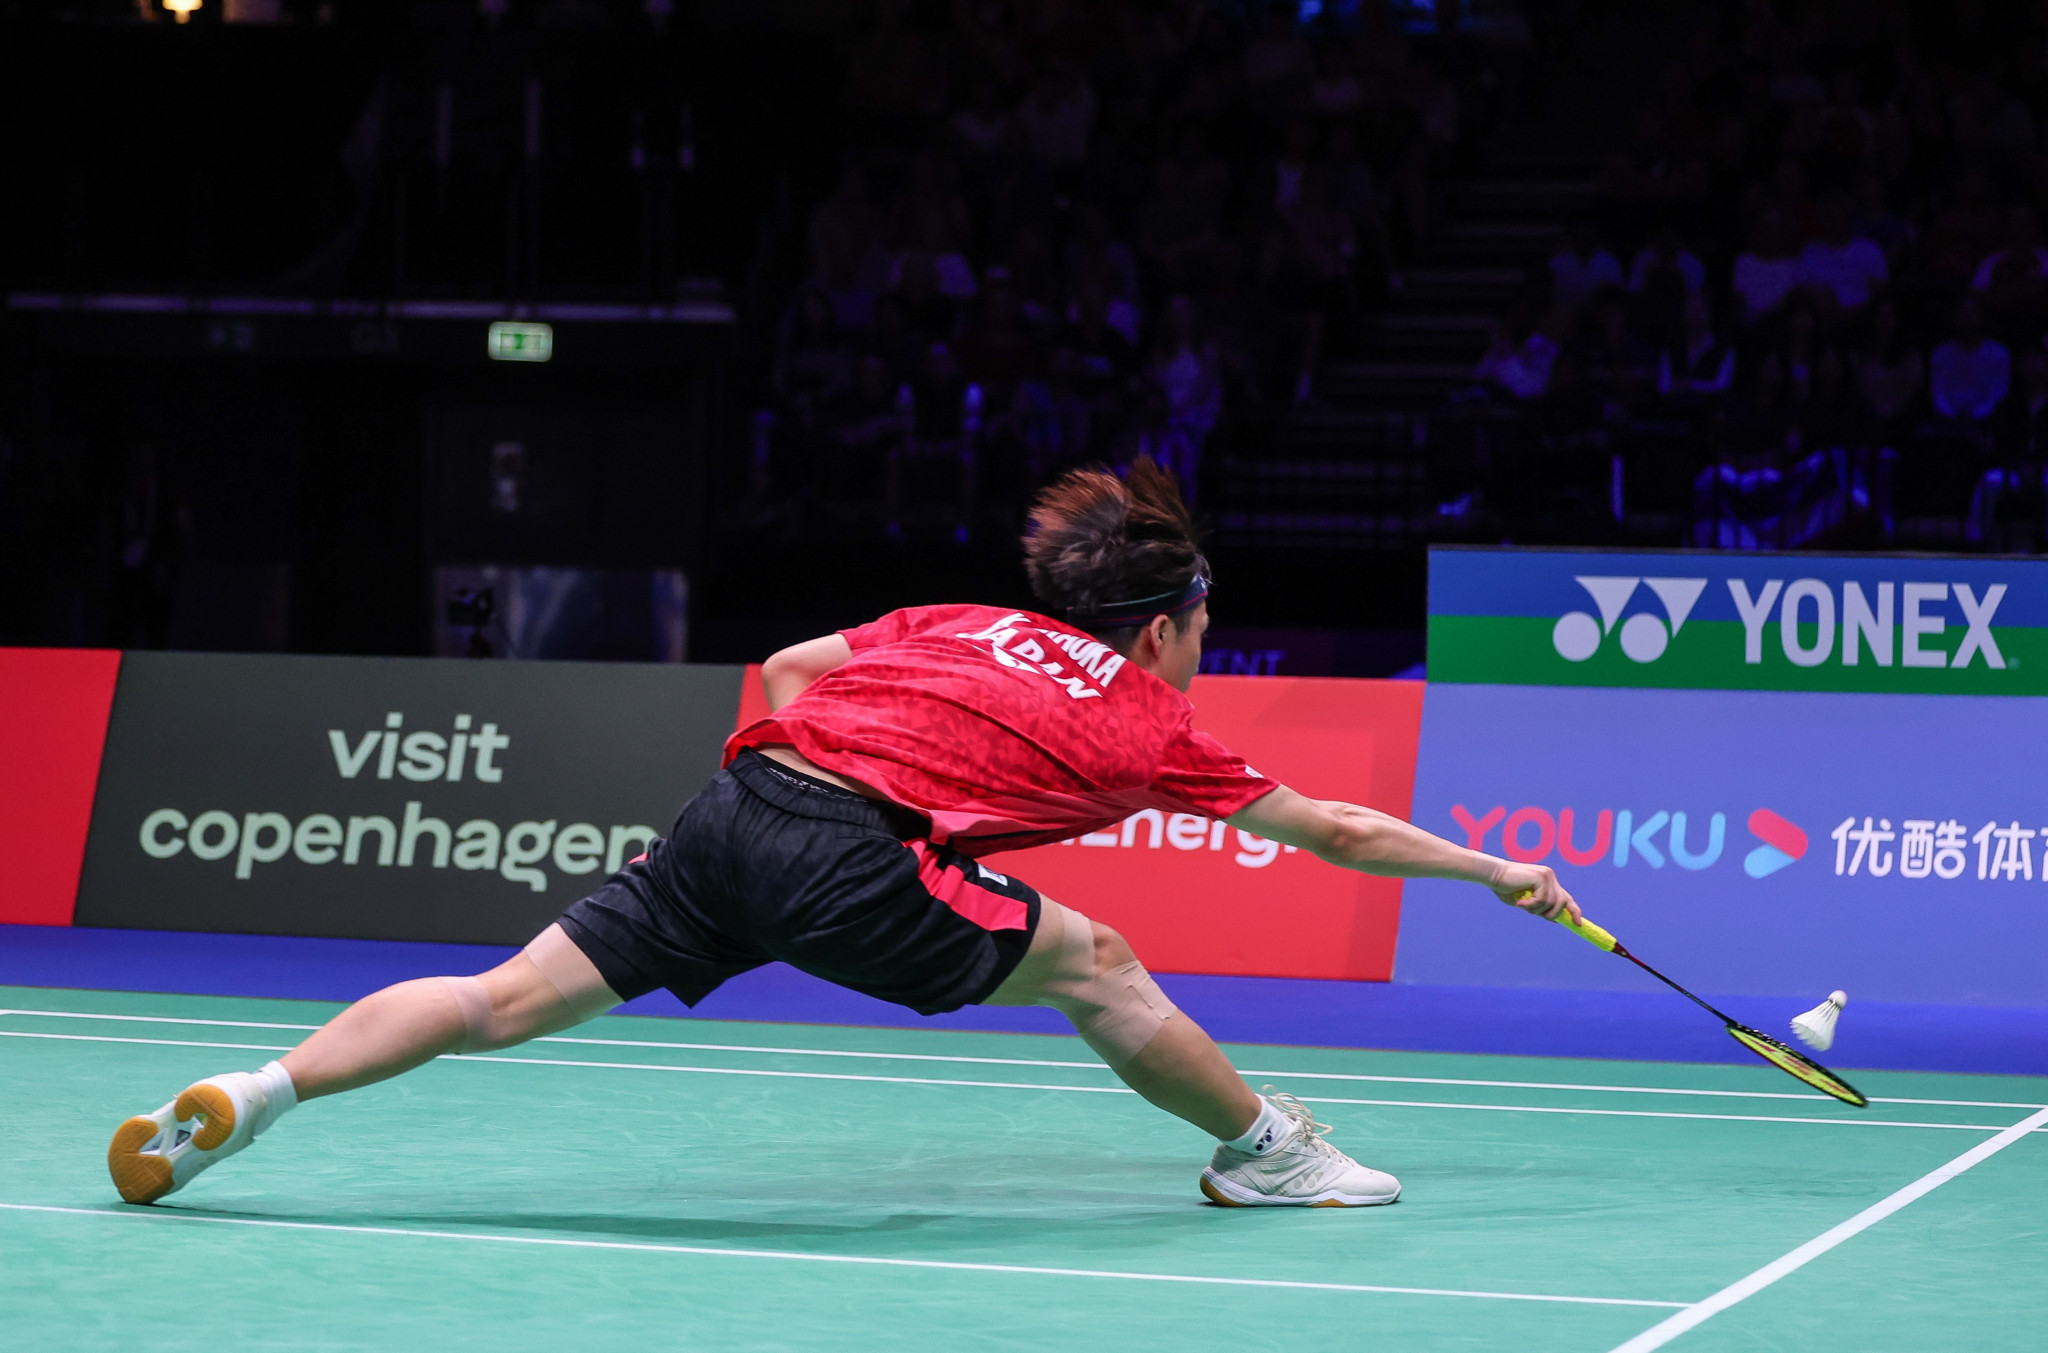 Japan's Kodai Naraoka was three points away from winning only to crumble physically ©Badmintonphoto